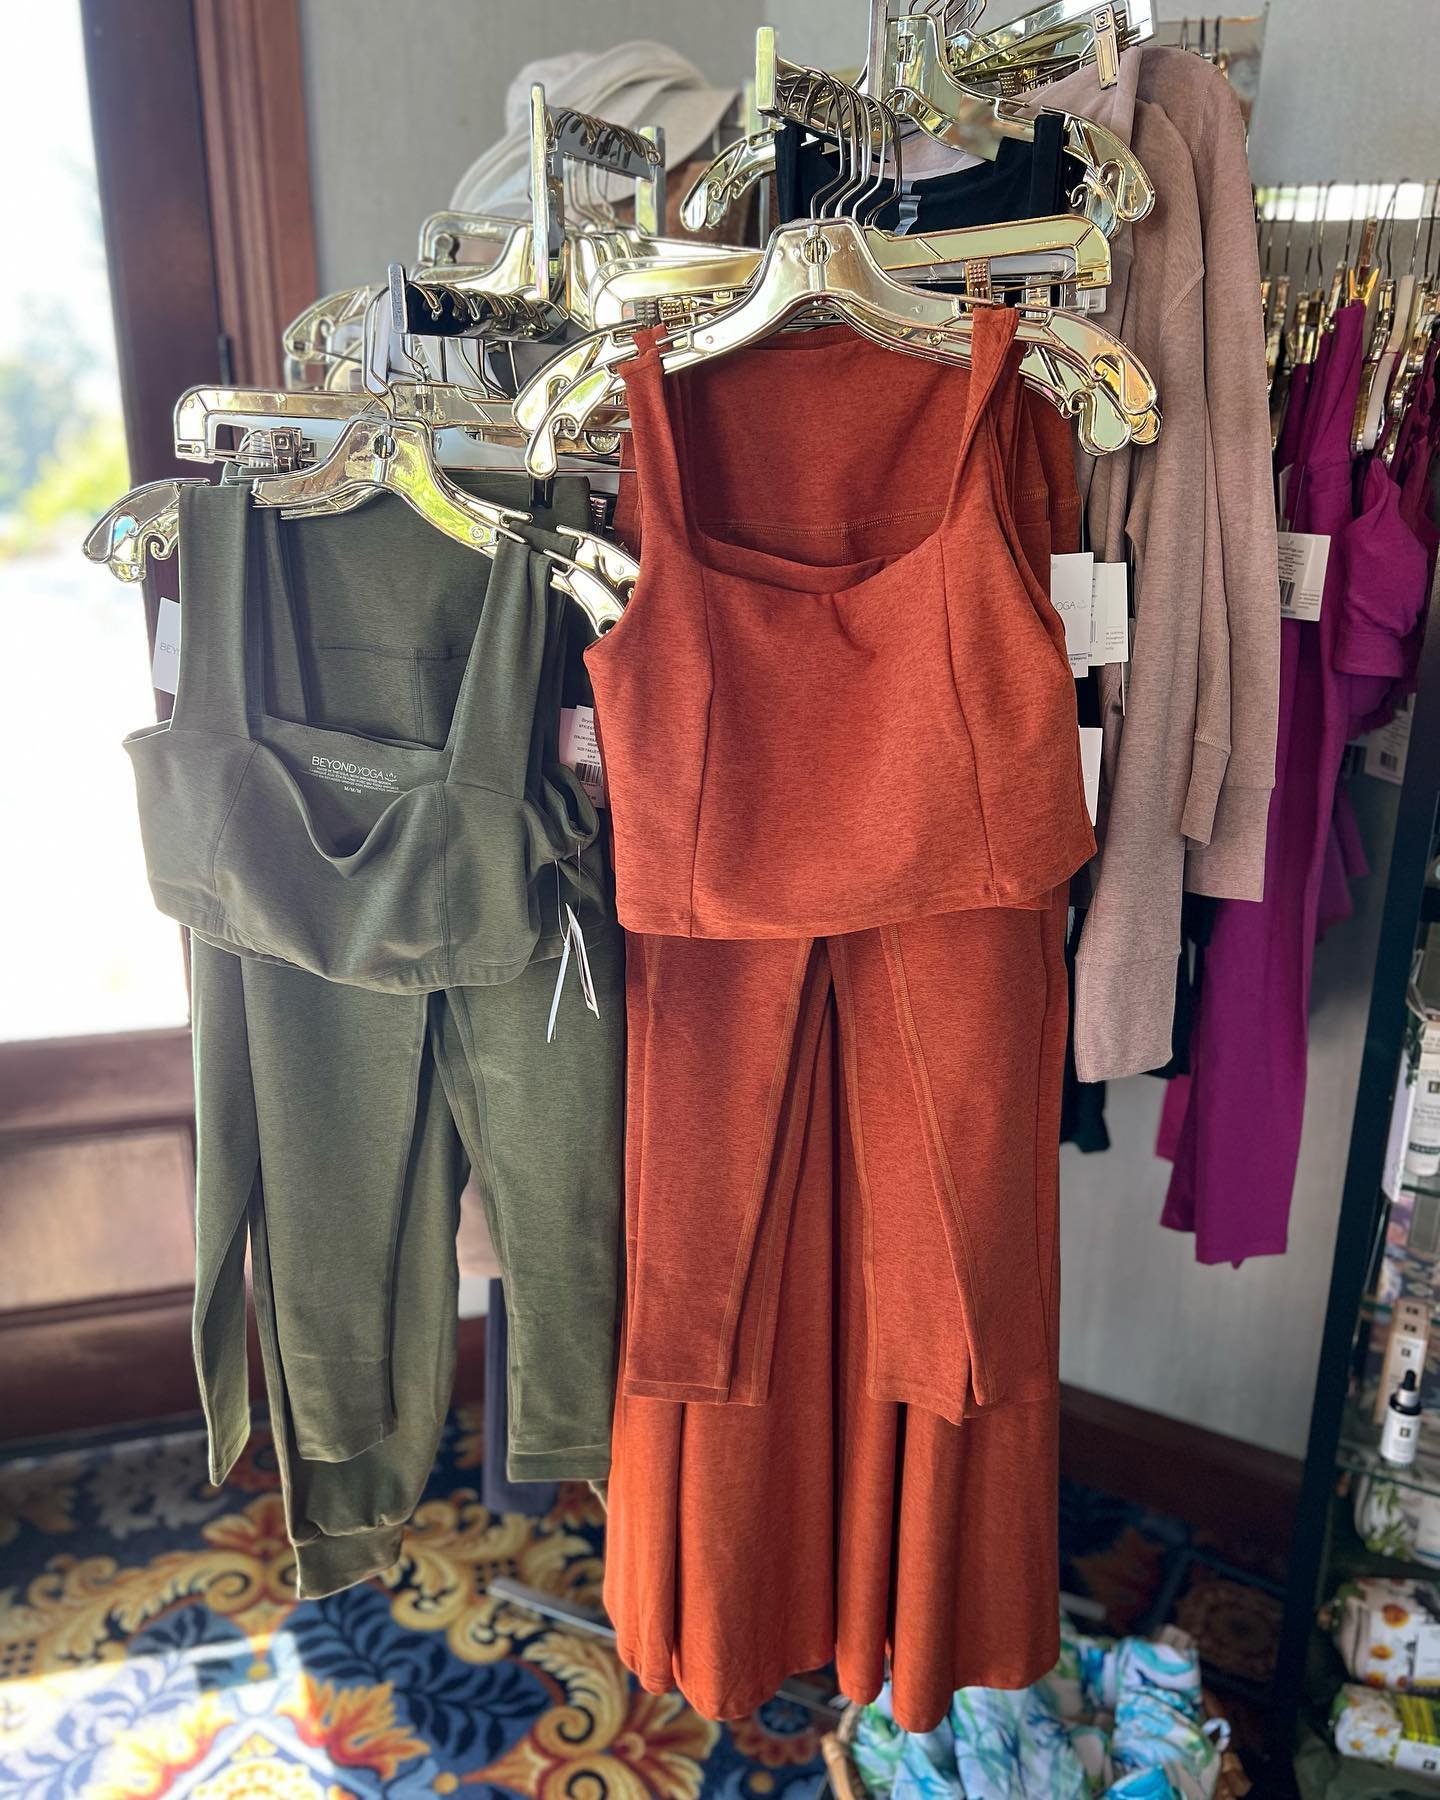 Mother&rsquo;s Day Weekend Sale!

20% off all dresses and sandals from Beyond Yoga, Tommy Bahama and Okabshi. 👗🩴

40% off select bathing suits from Tommy Bahama &amp; LaBlanca👙🩱

#mothersdaysale #spoilmom #spasale